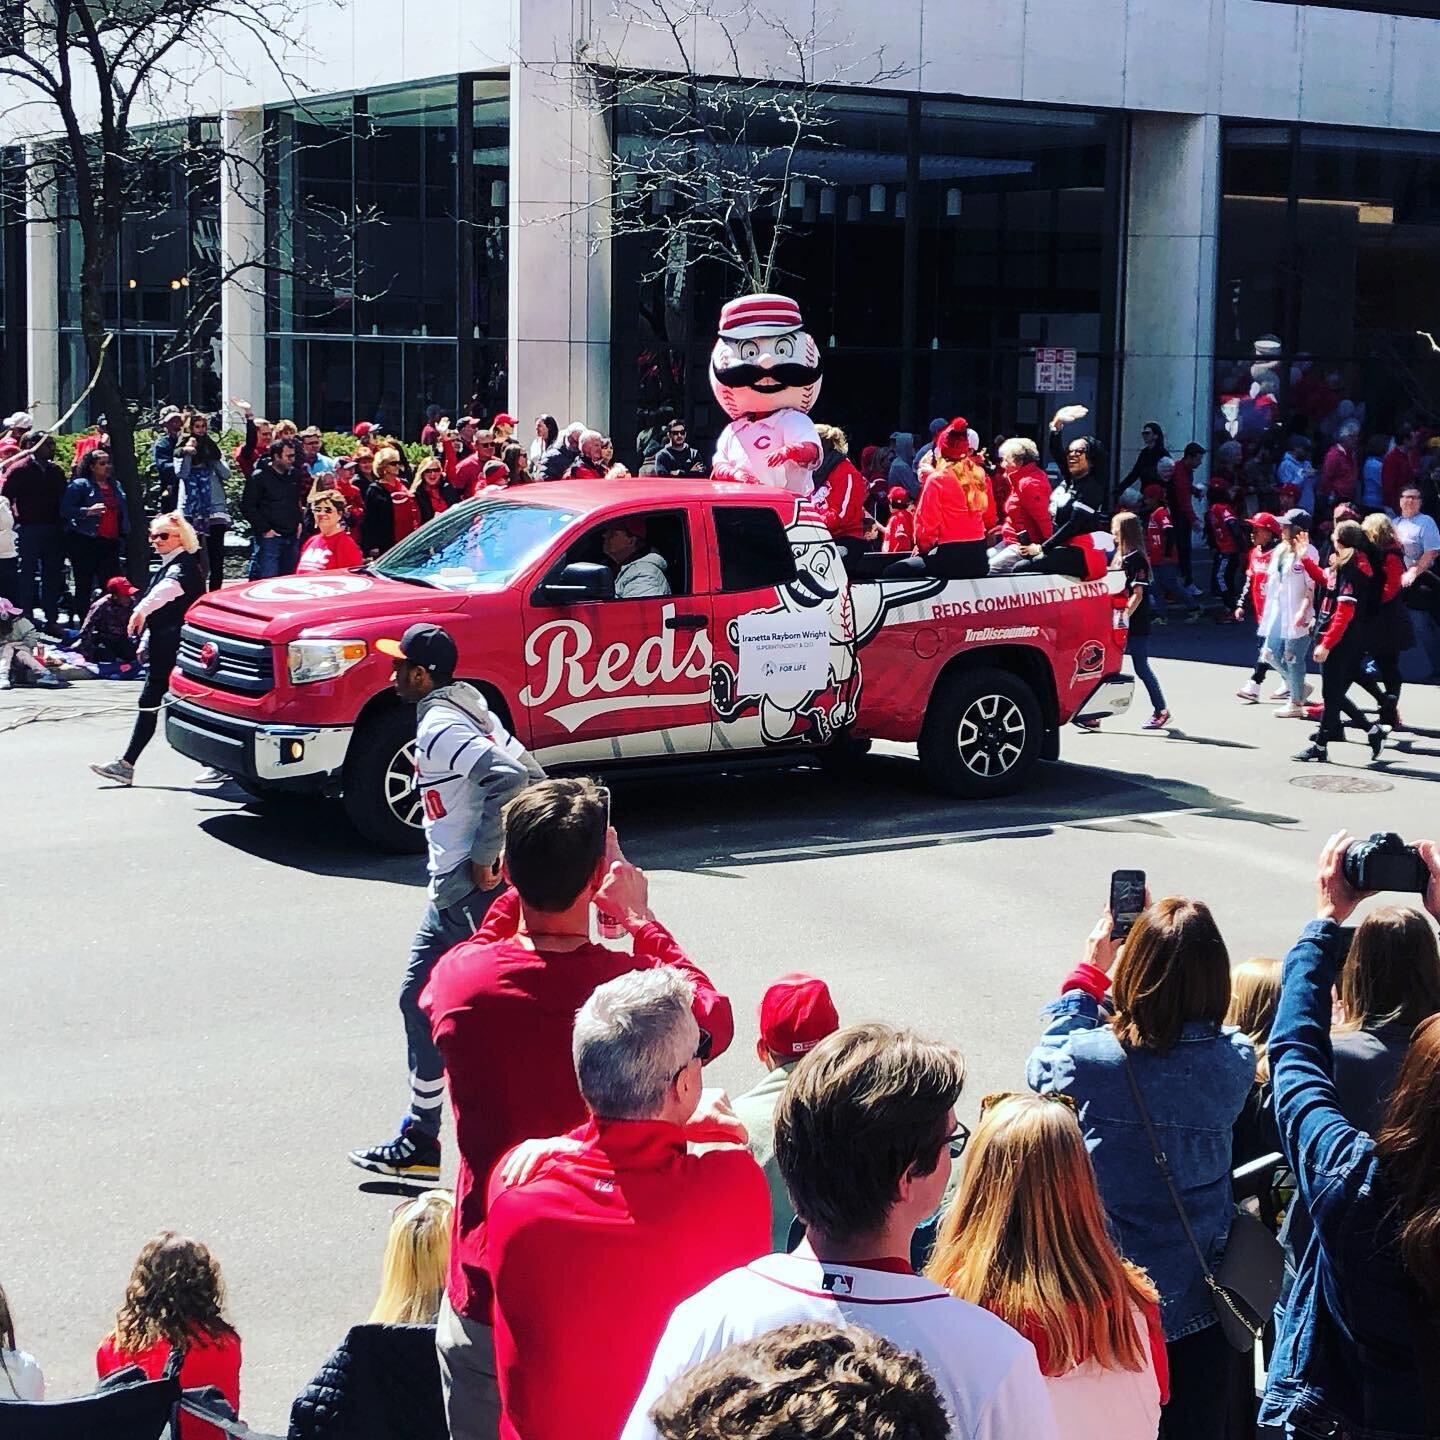 Thank you Columbia Plaza for an amazing turnout for Opening Day! Thank you to everyone who stopped by and celebrated with us! If you had number 30 on the back of your badge you are the winner of two free reds tickets! Email me at kgettelman@diversifi